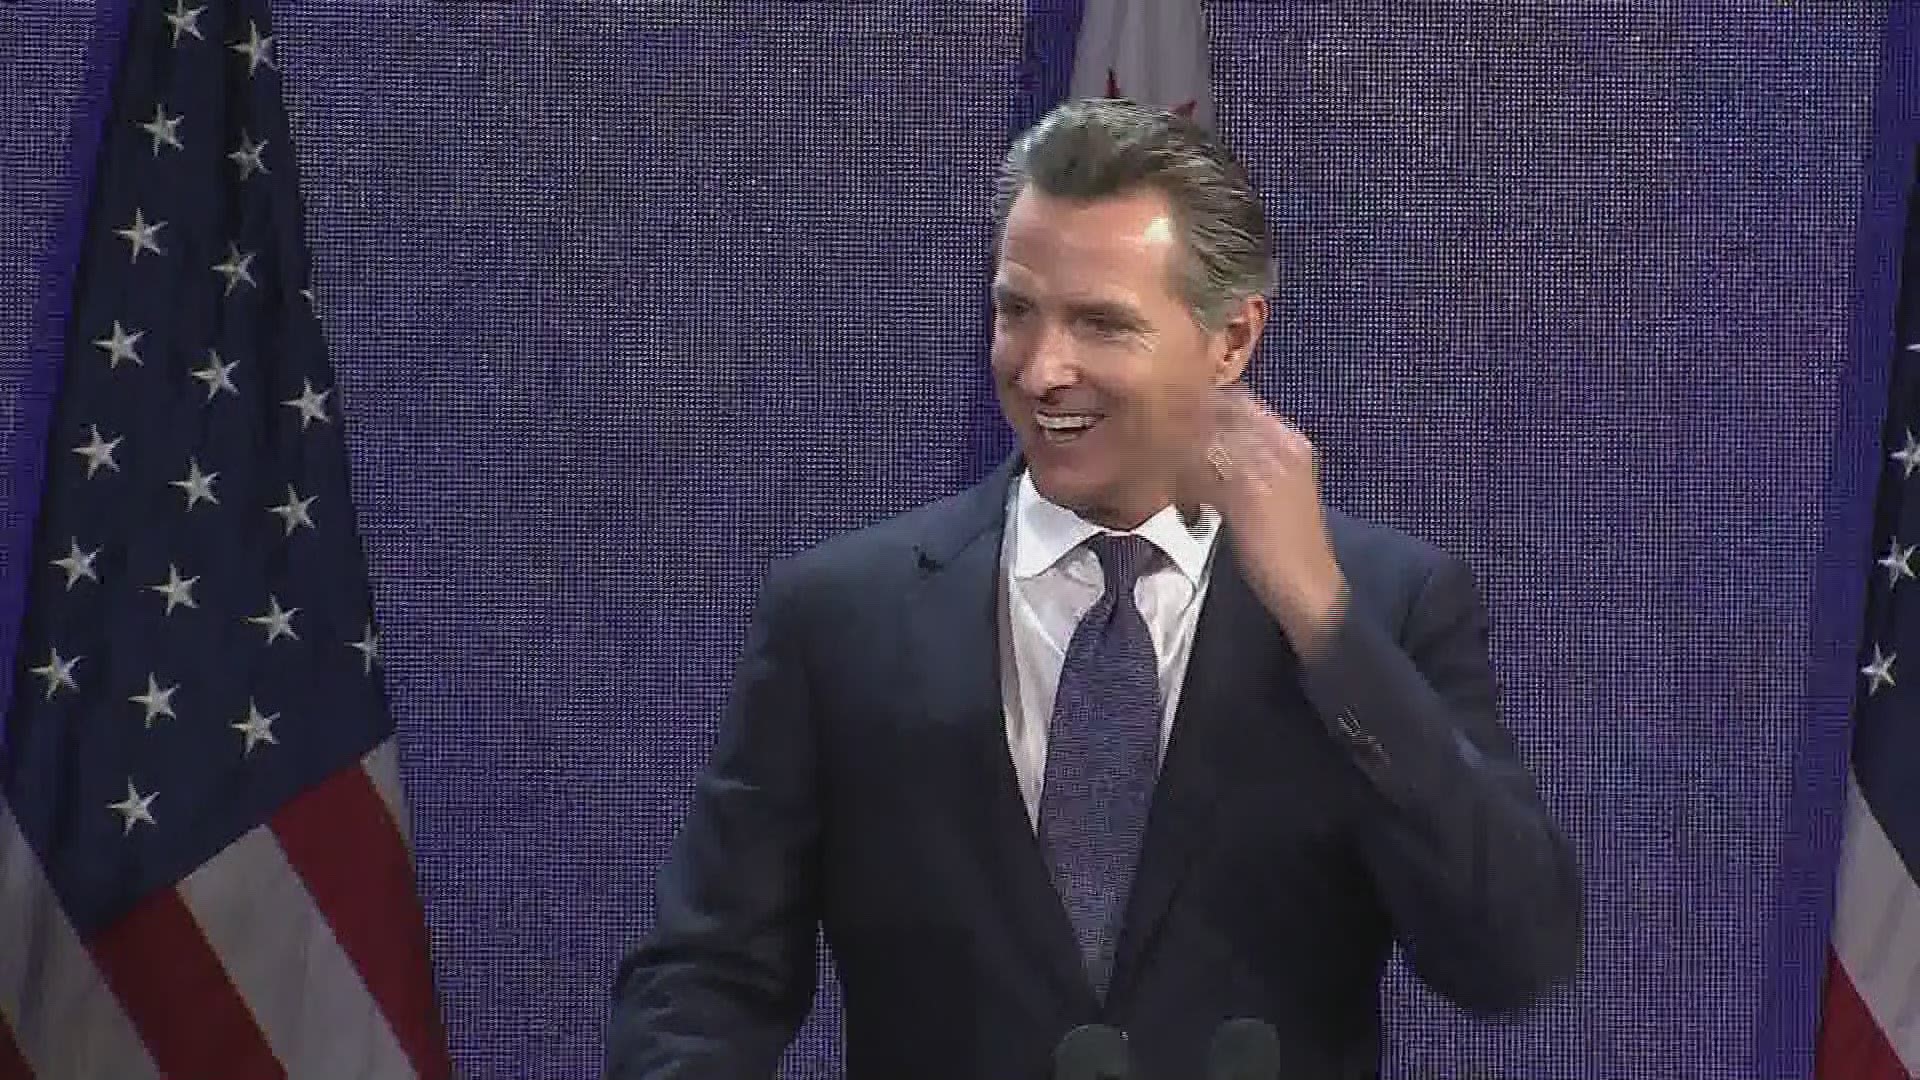 Gavin Newsom, who has spent time in public office as Mayor of San Francisco and, most recently, as Lieutenant Governor, will now become the 40th Governor of California. Newsom succeeds the state's two-time, and longest-serving, Governor Jerry Brown.